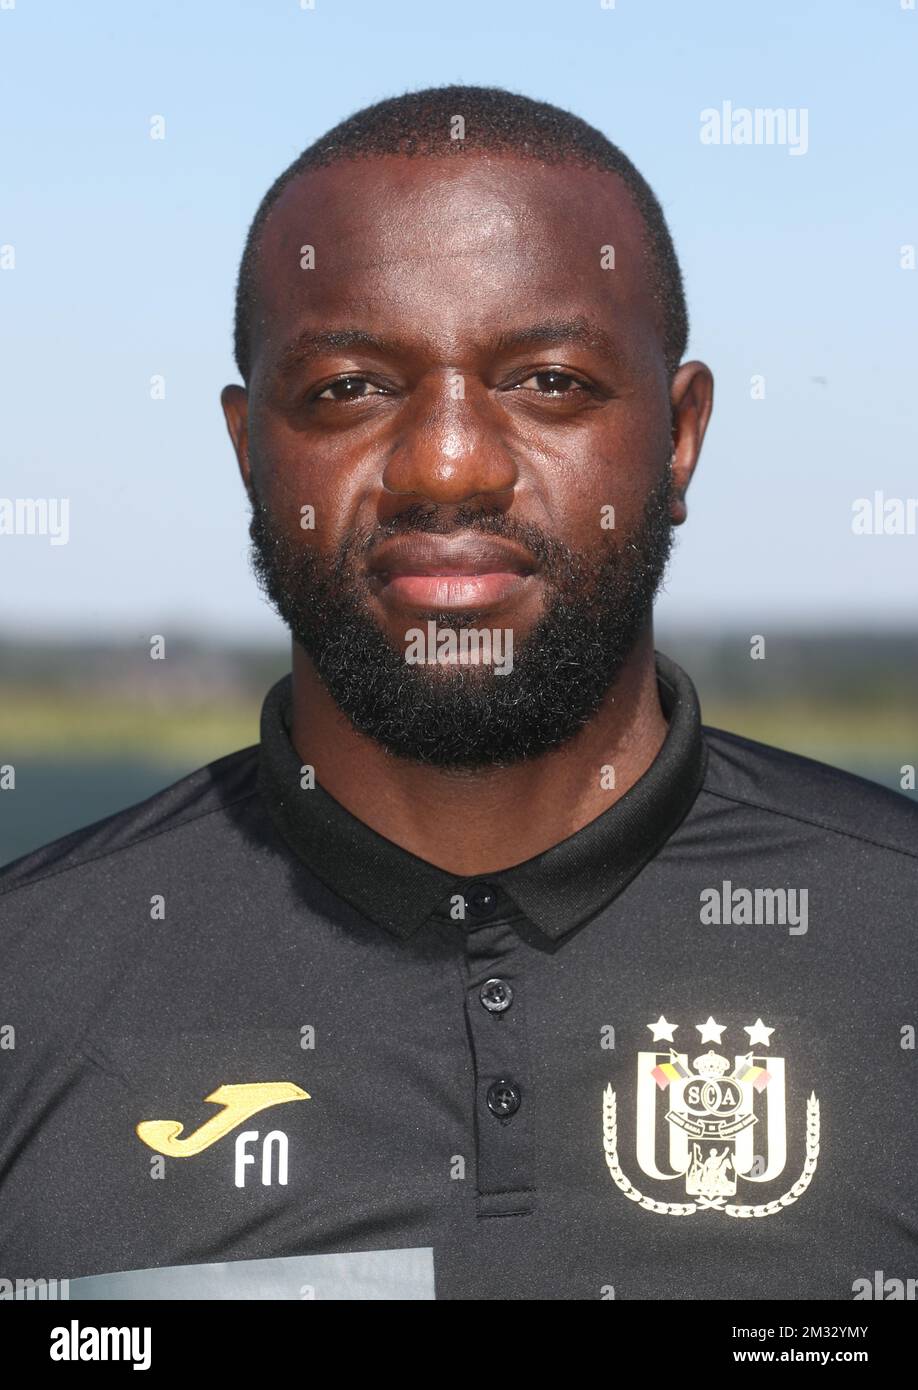 Anderlecht's assistant coach Floribert Ngalula poses for the photographer, in marge of the 2020-2021 photoshoot of Belgian Jupiler Pro League club RSCA Anderlecht, Thursday 30 July 2020 in Brussels. BELGA PHOTO VIRGINIE LEFOUR Stock Photo